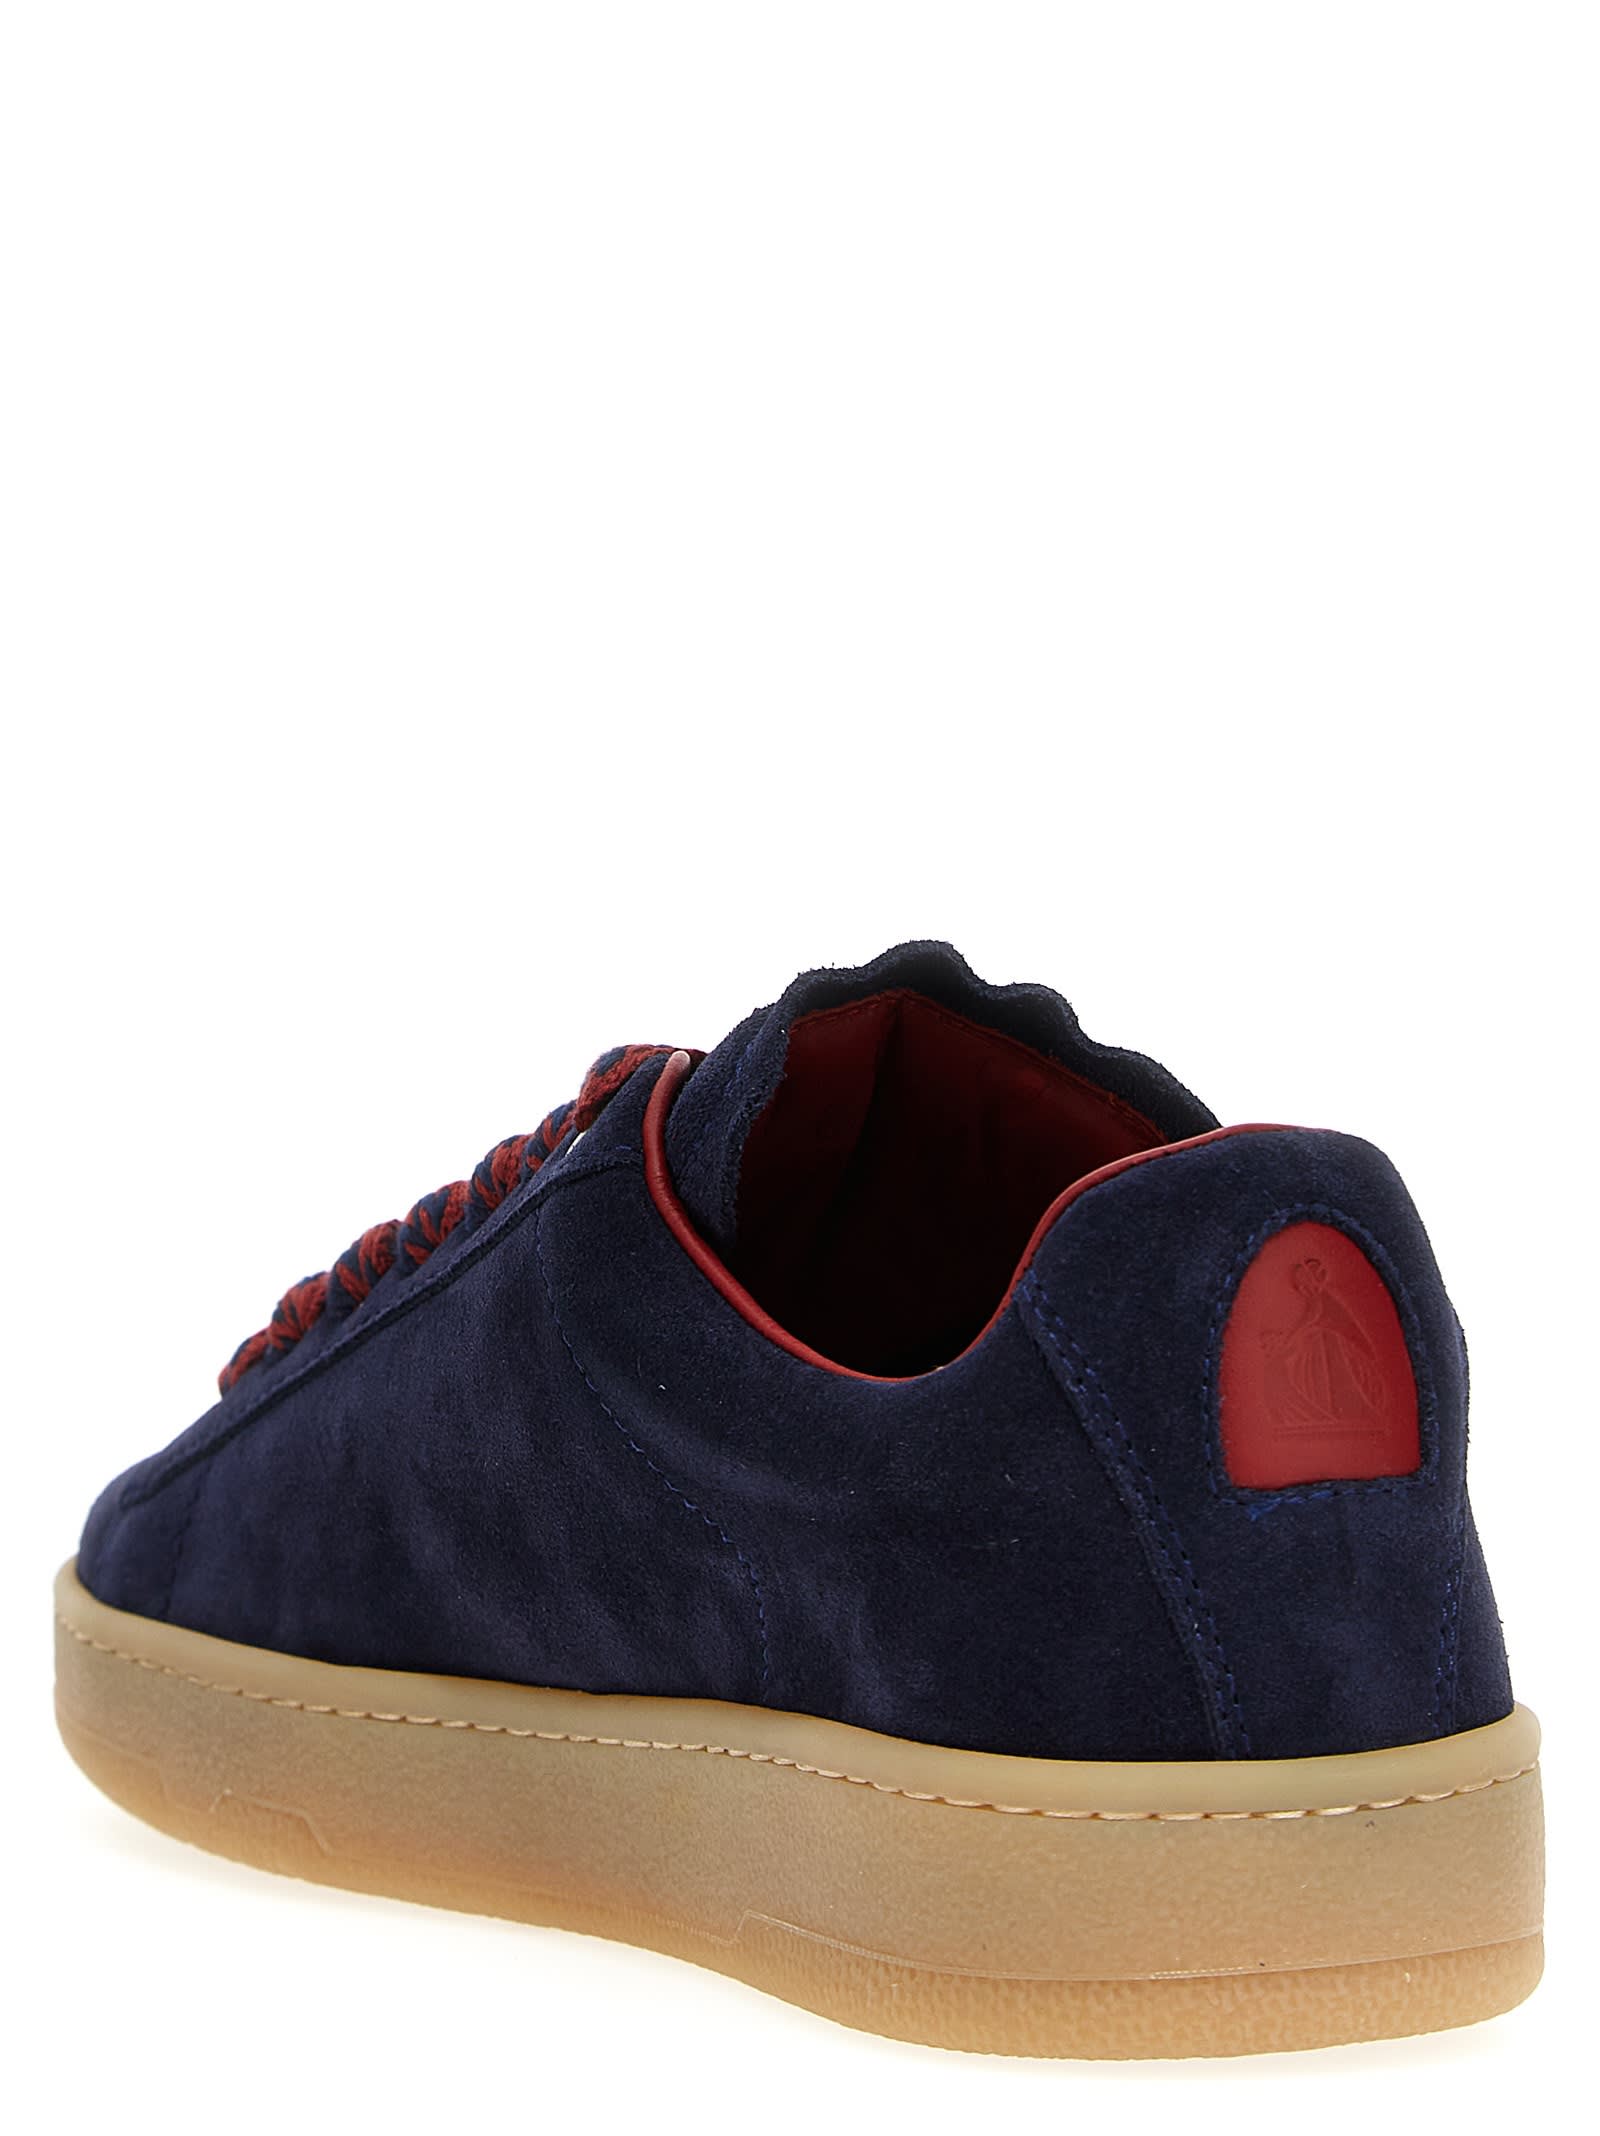 Shop Lanvin Lite Curb Sneakers In Navy Blue/red